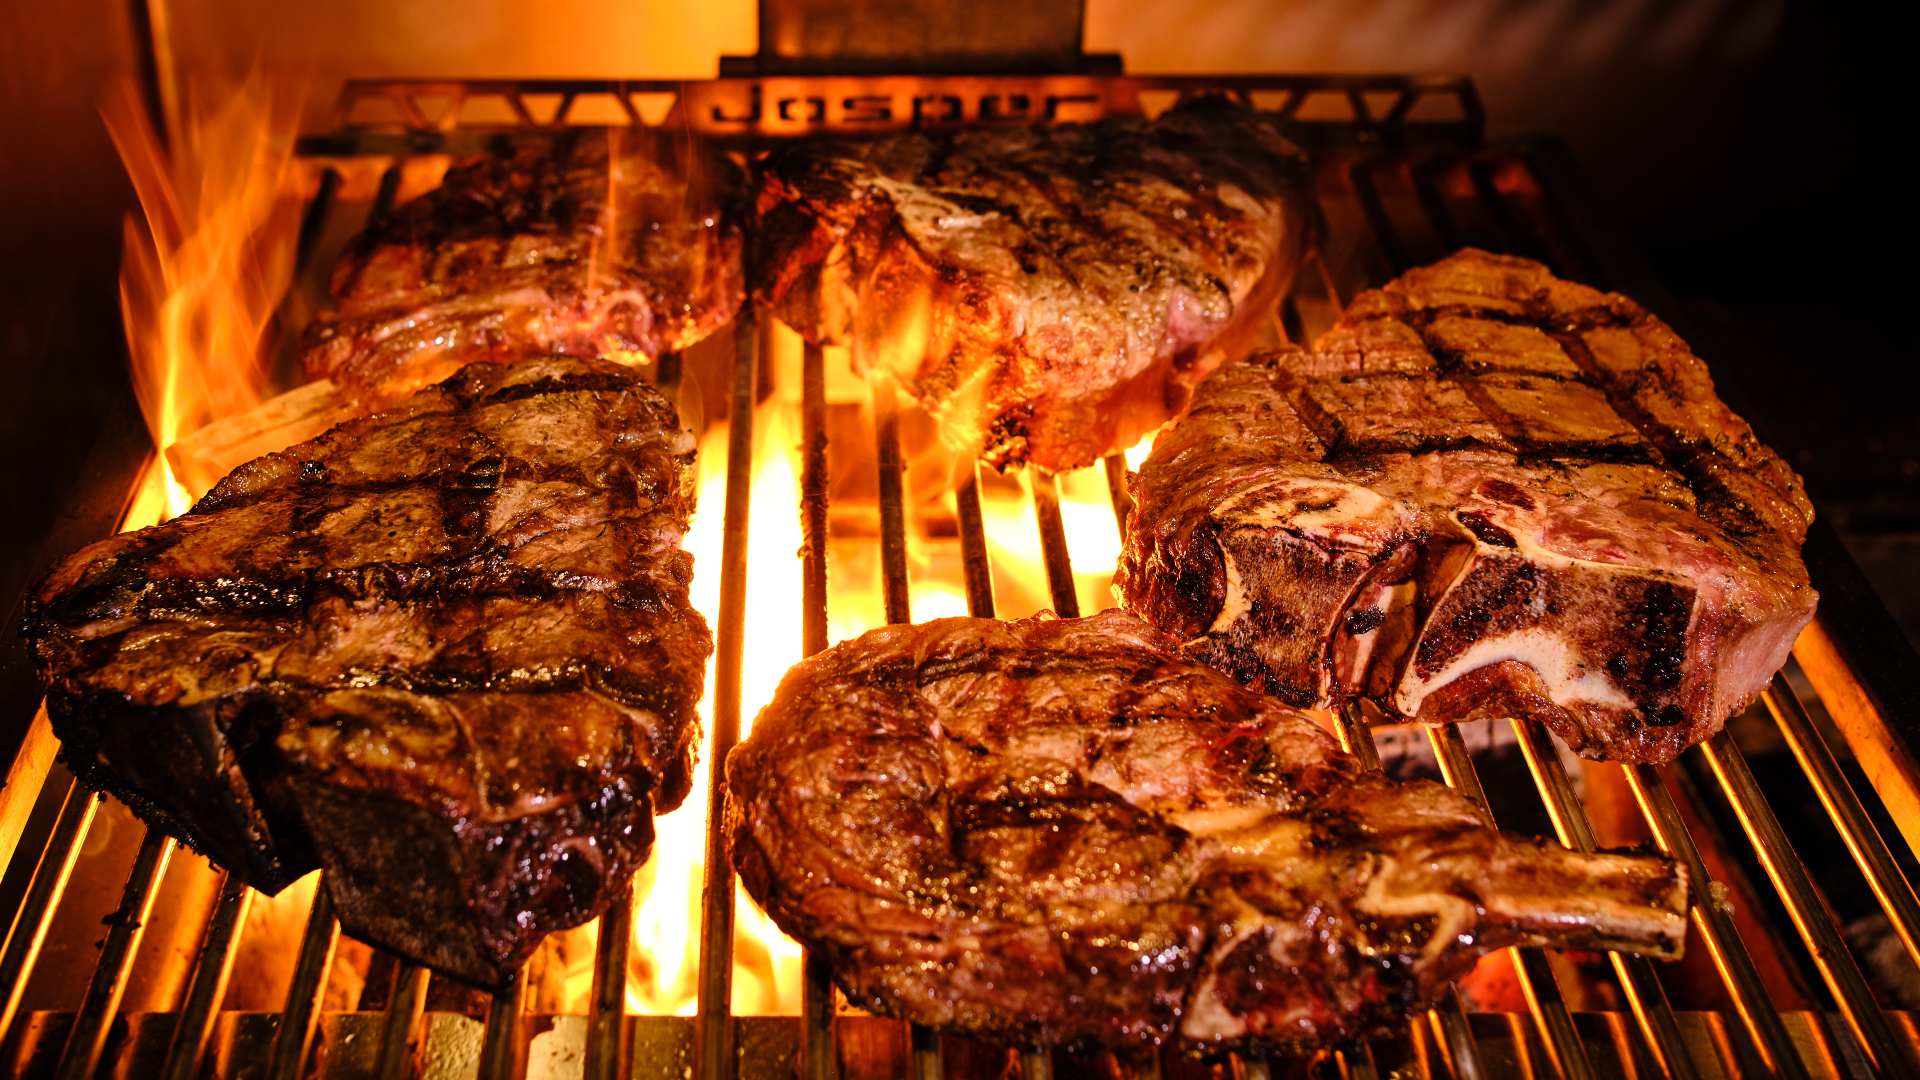 Grill Americano - home to some of the best flame-grilled steaks in Melbourne.